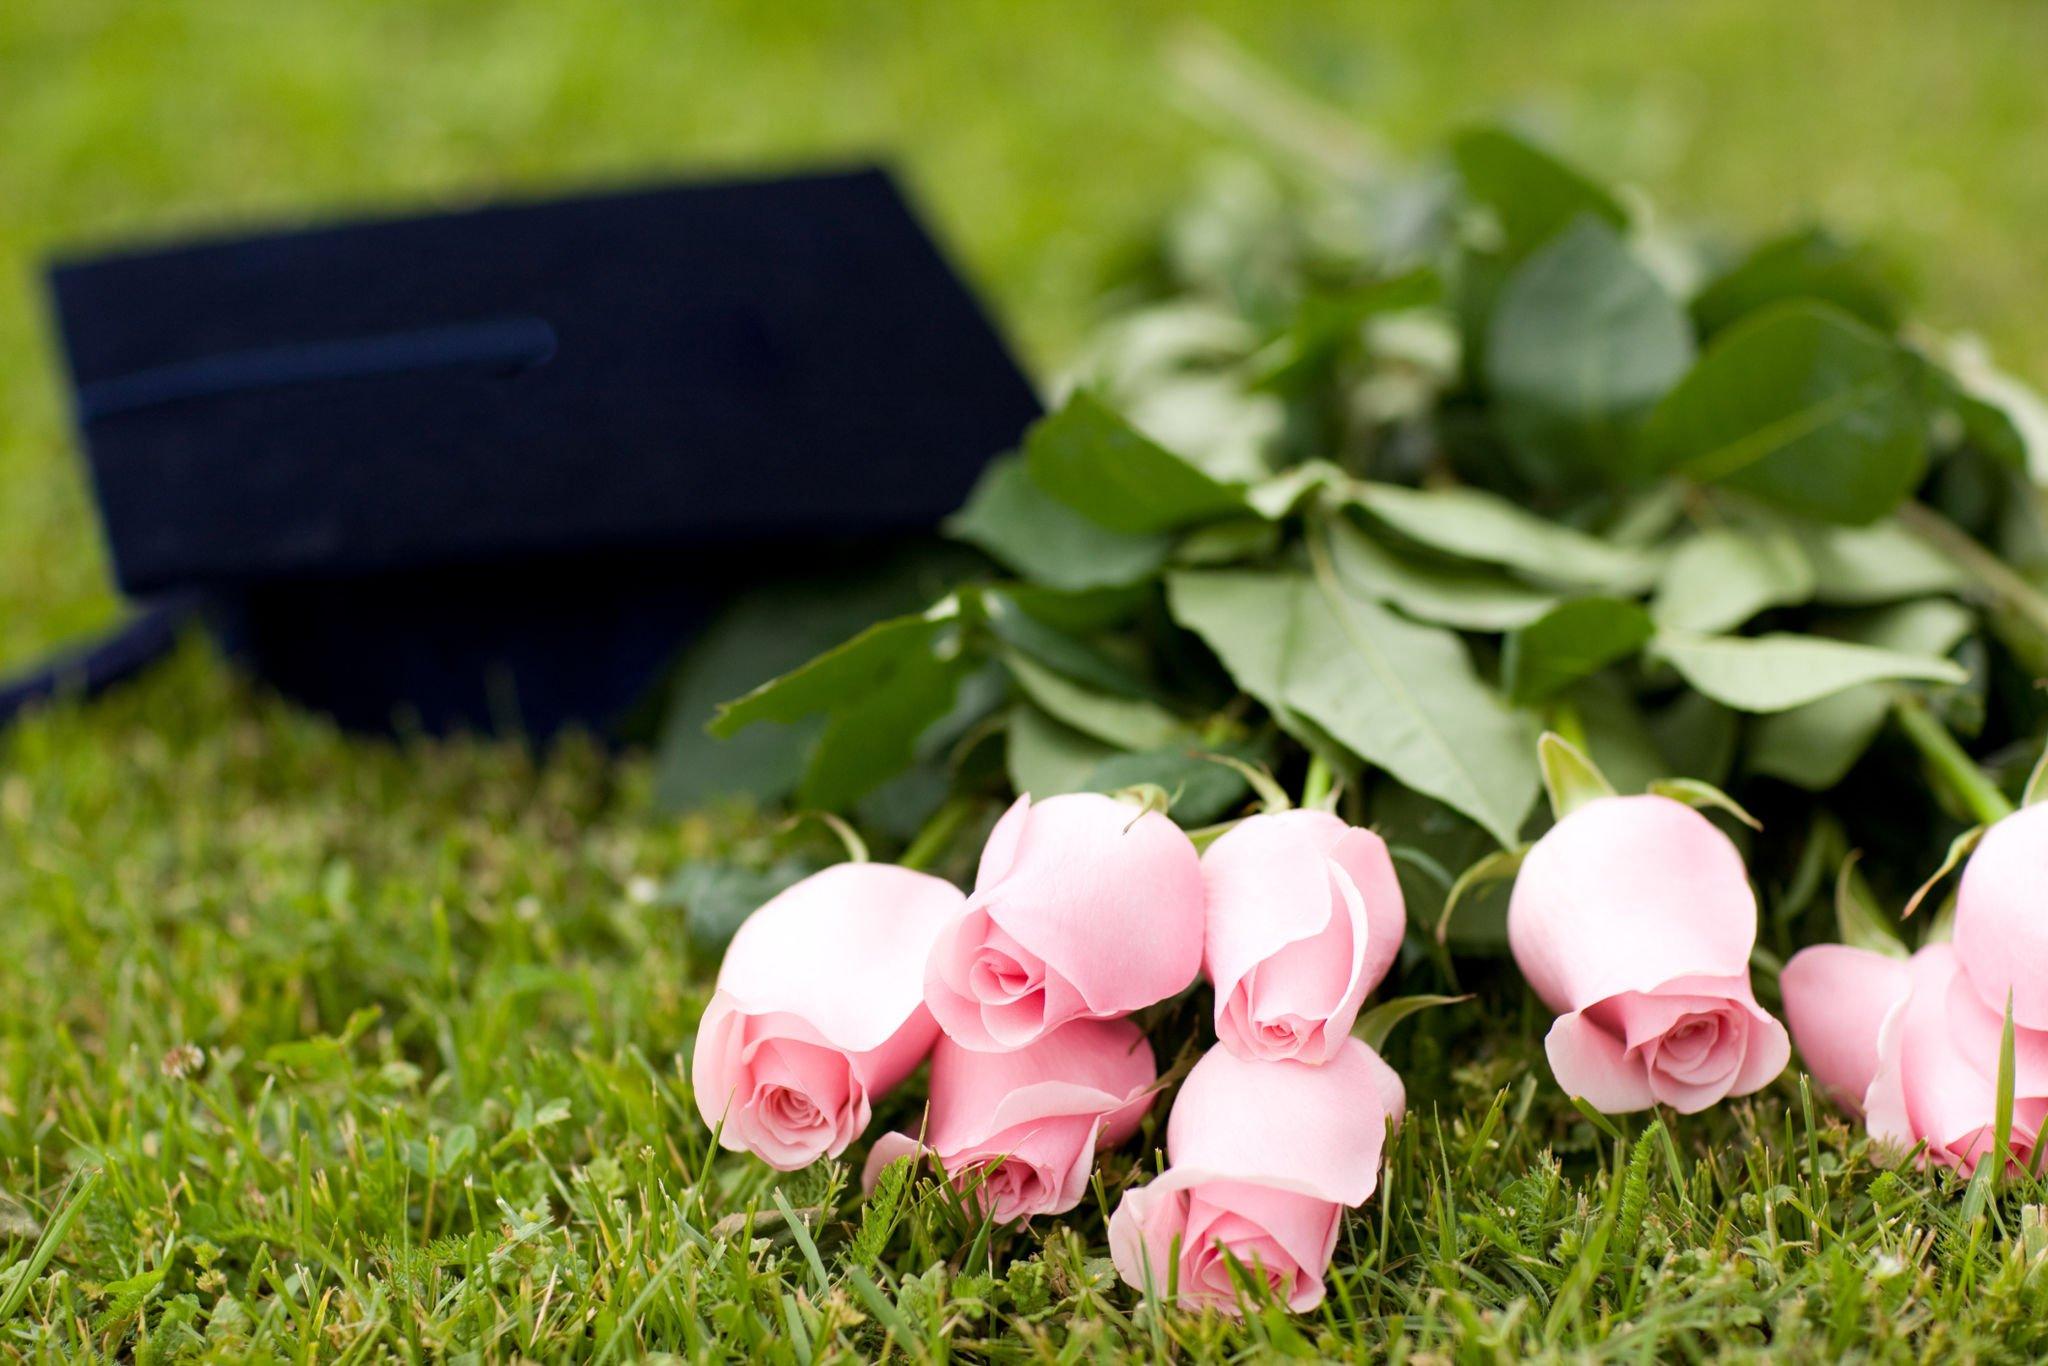 What Flower is Suitable For Graduation